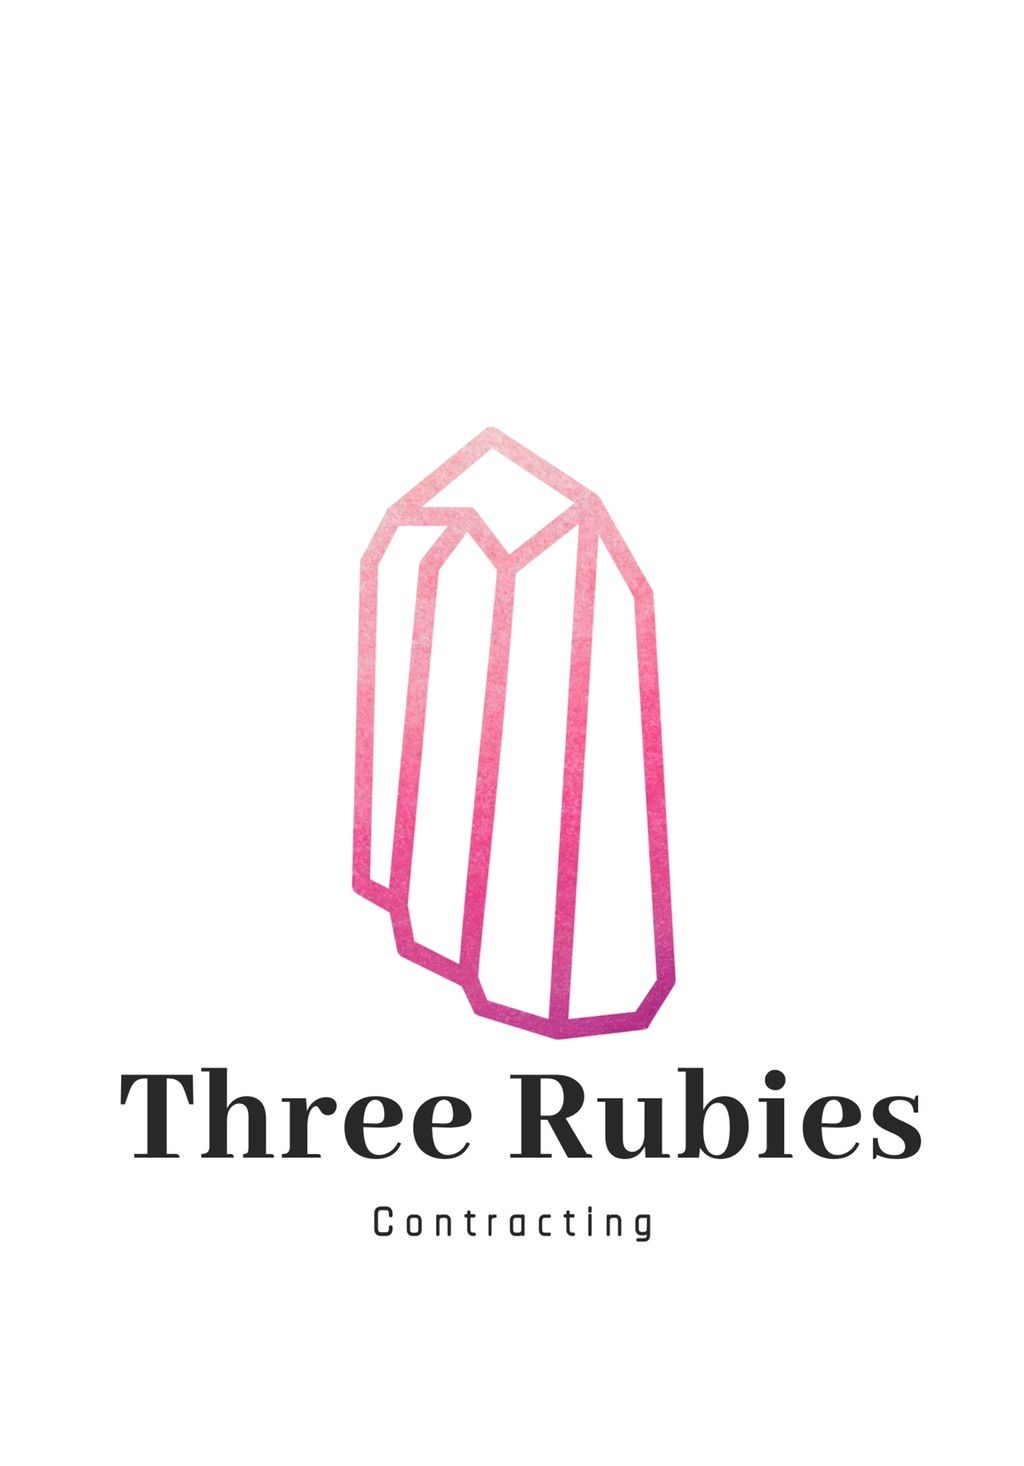 Three Rubies Contracting